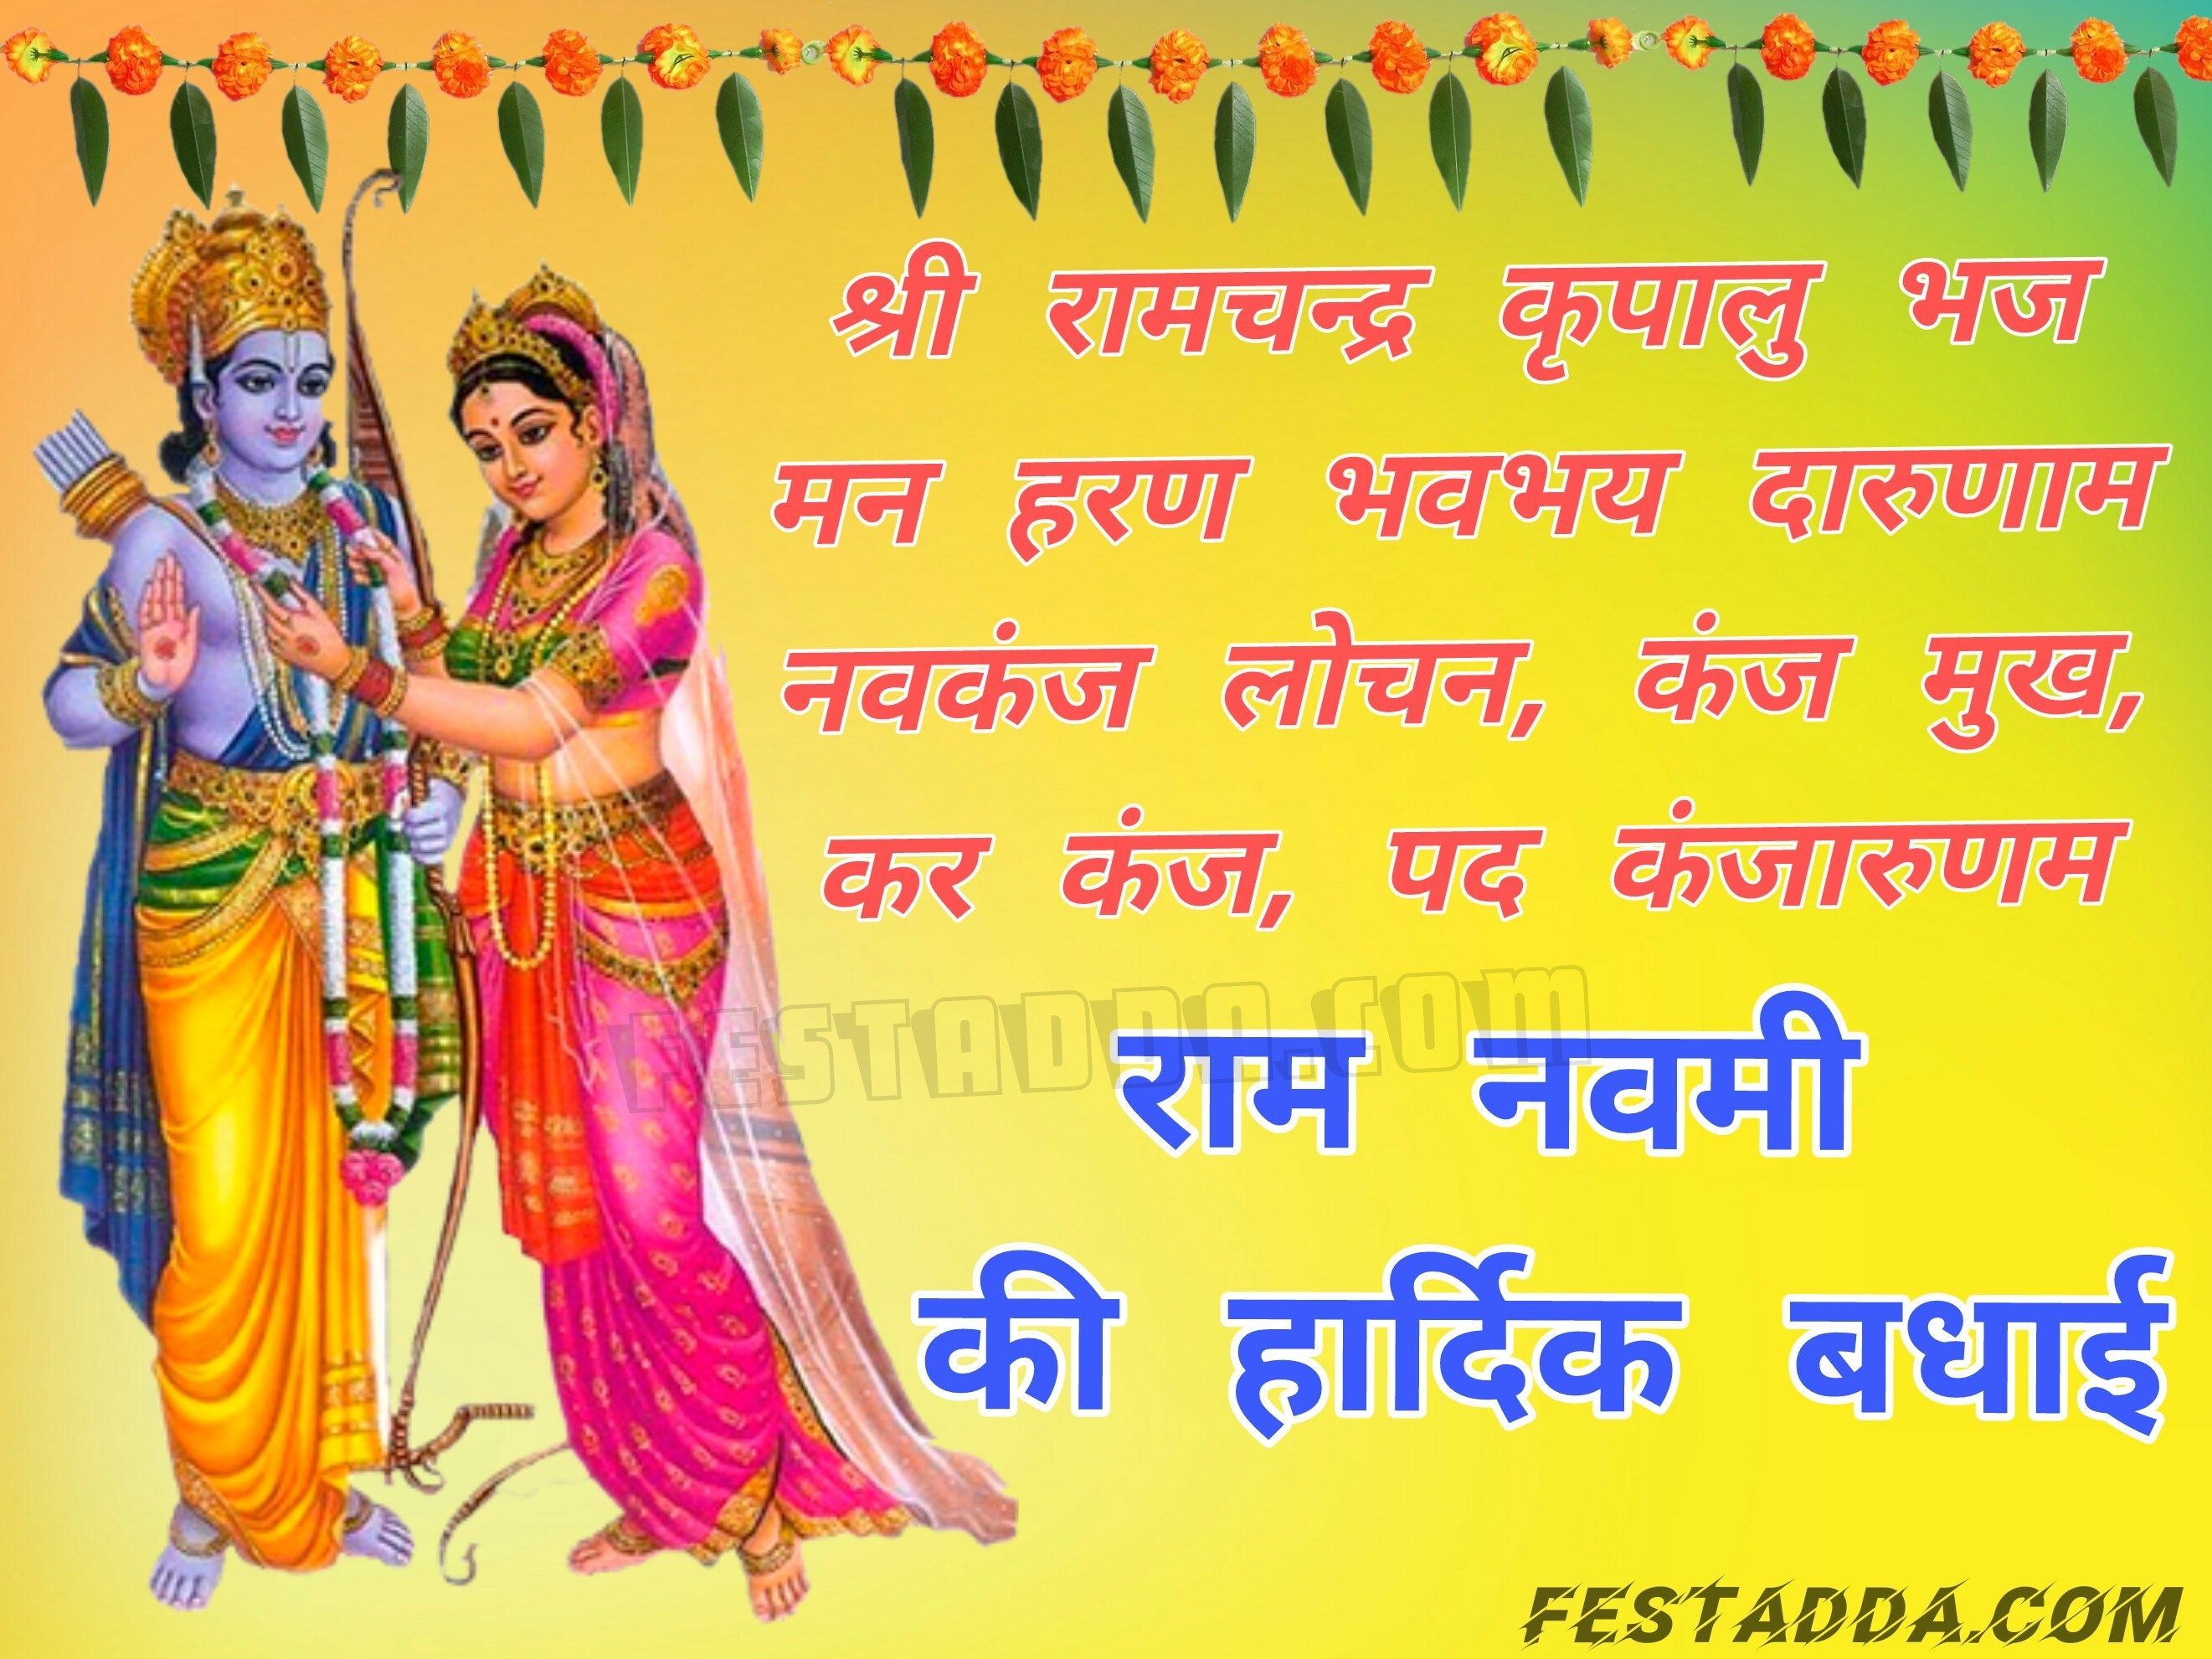 Sri Ram Navami Wishes 2020 Quotes Messages Wallpaper In Hindi